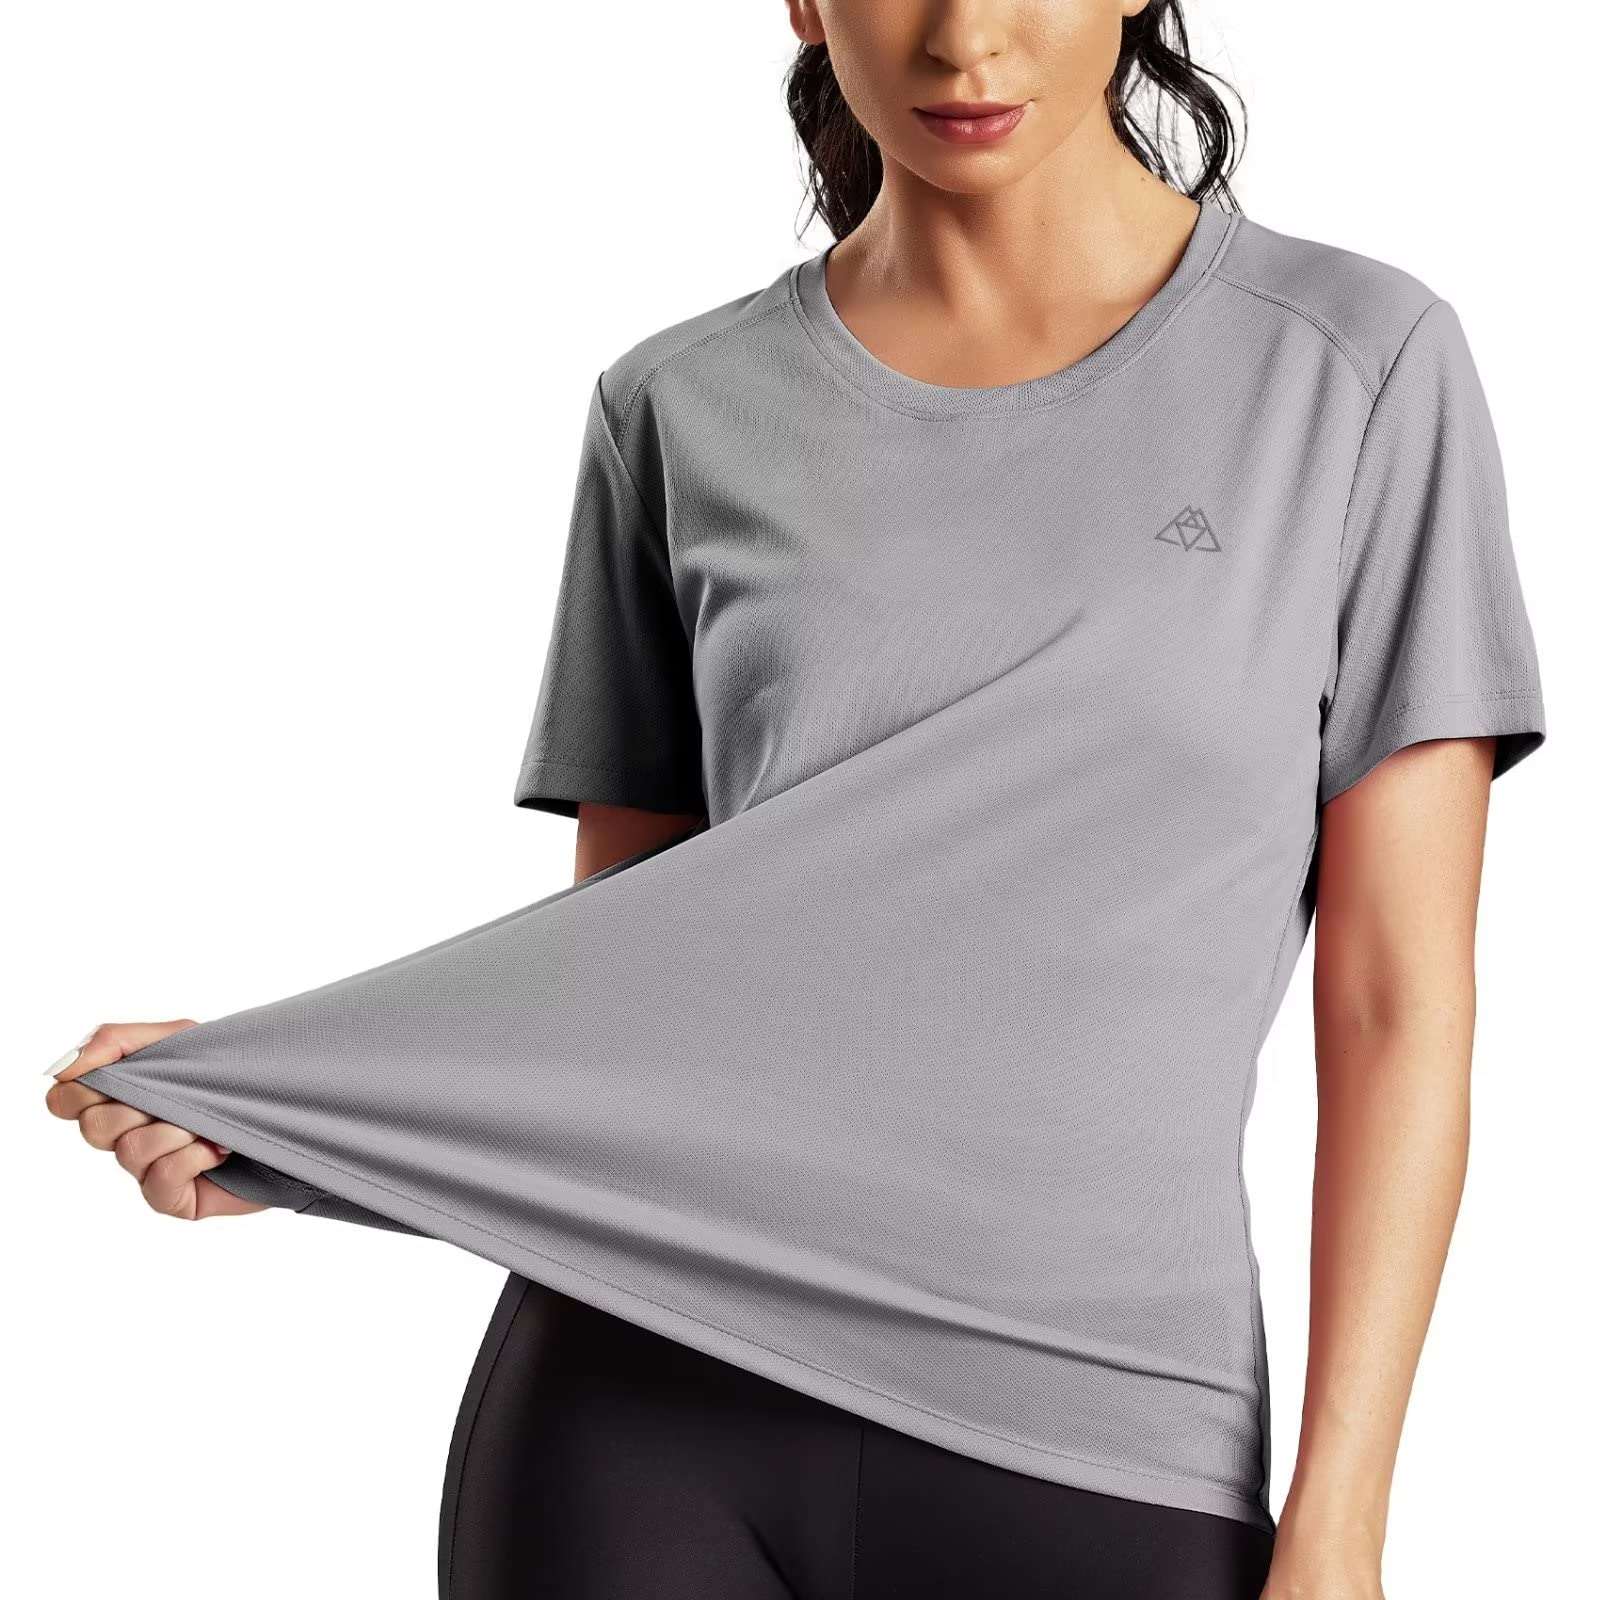 Women's Dry Fit Running Athletic T-Shirts Active Mesh Tee Shirt - Grey / XS